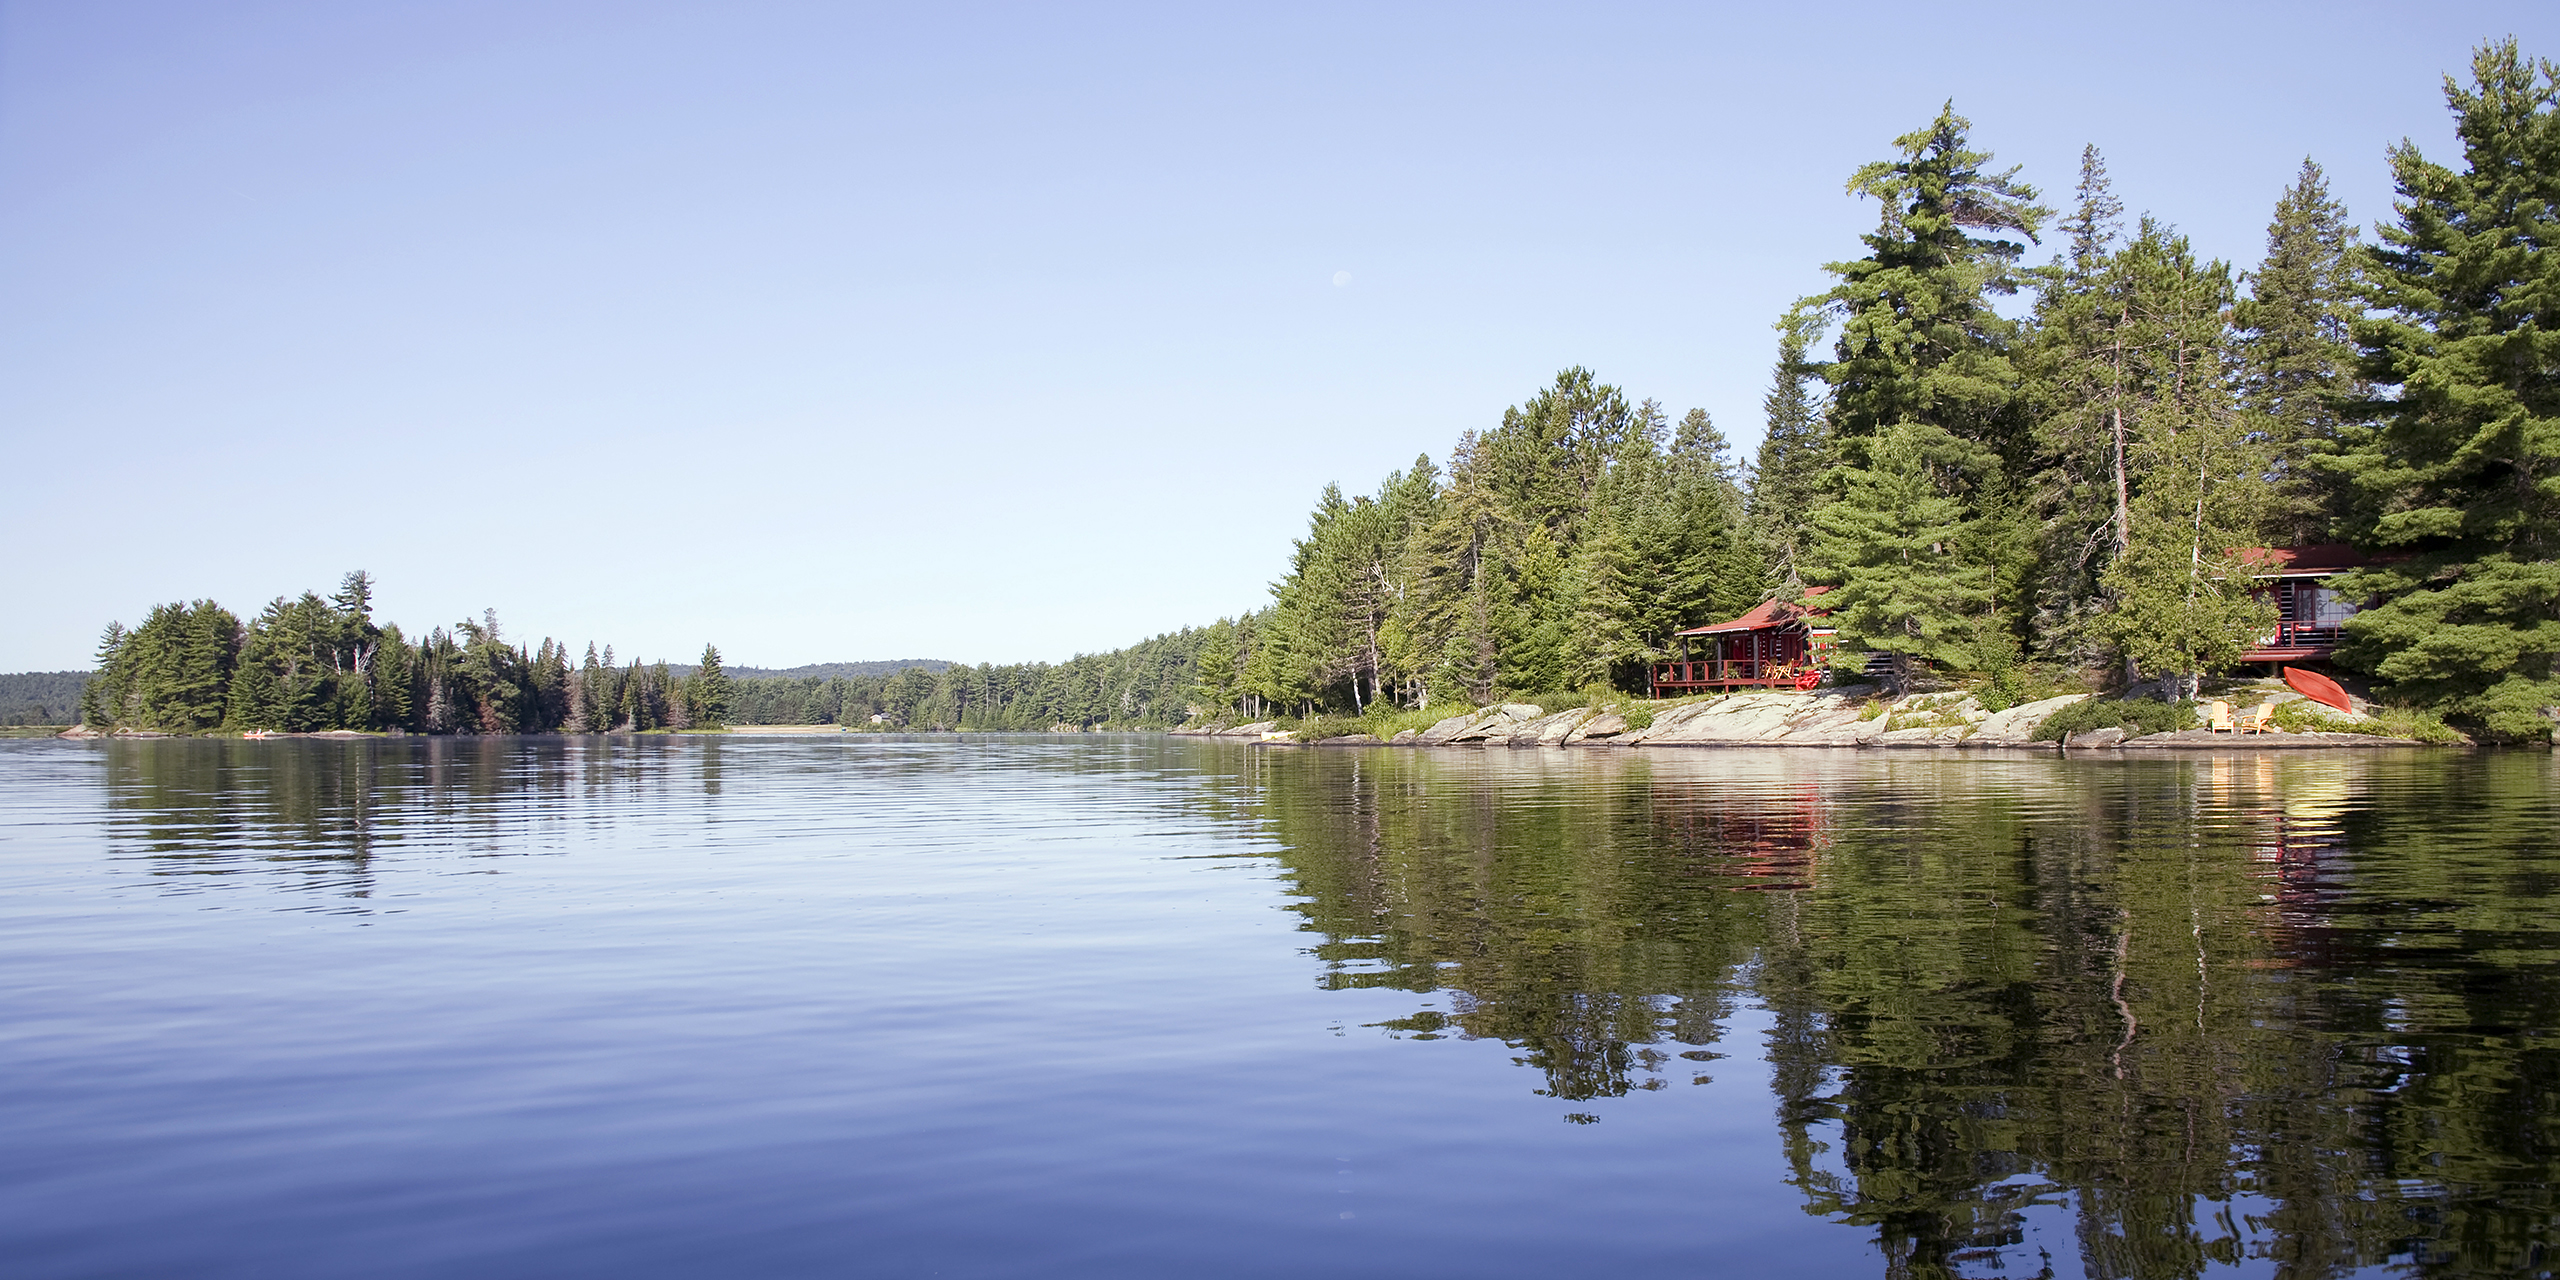 panoramic view of algonquin property from lake with cabins